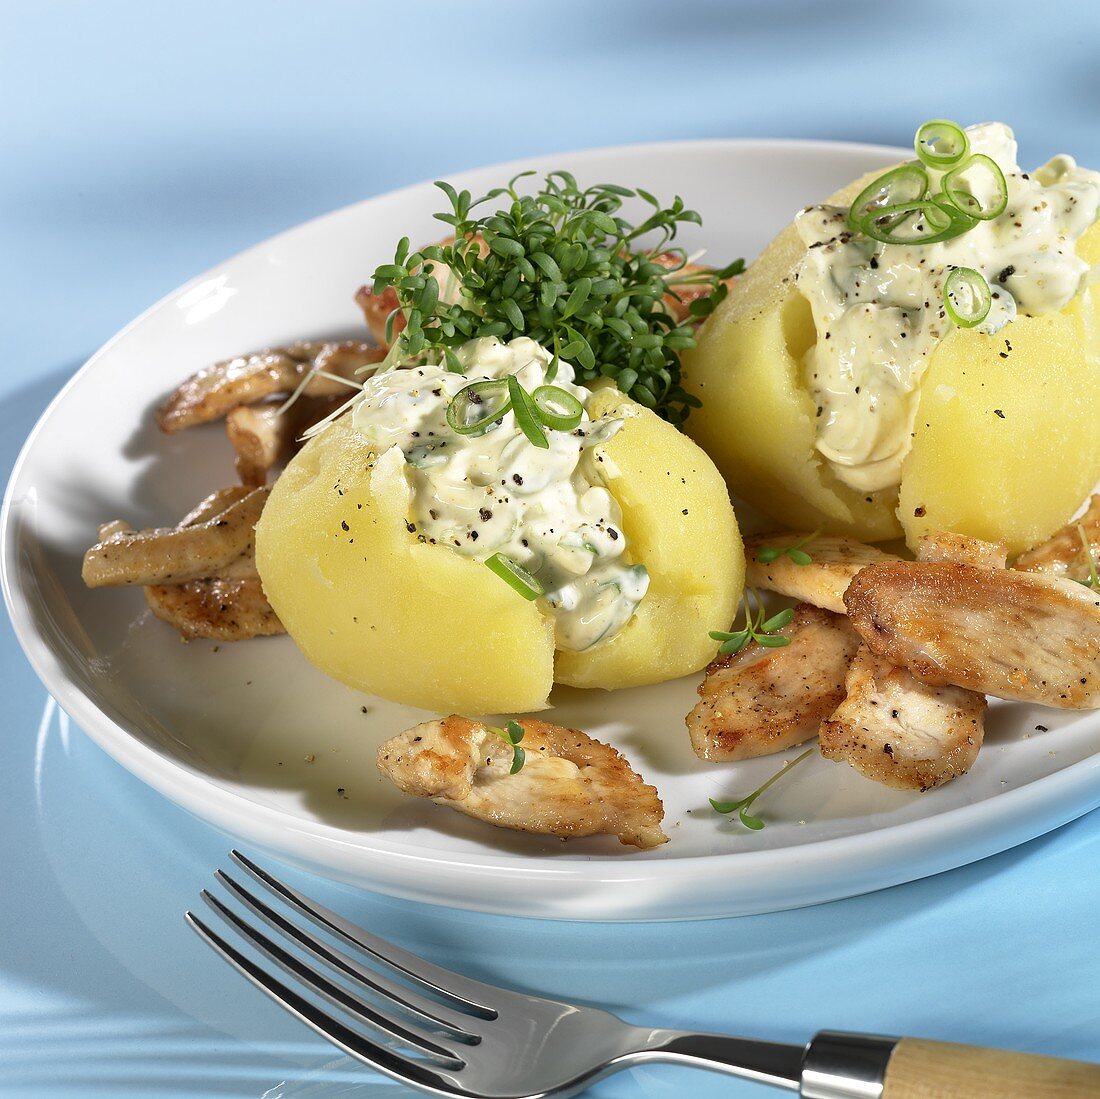 Stuffed jacket potatoes with chicken breast